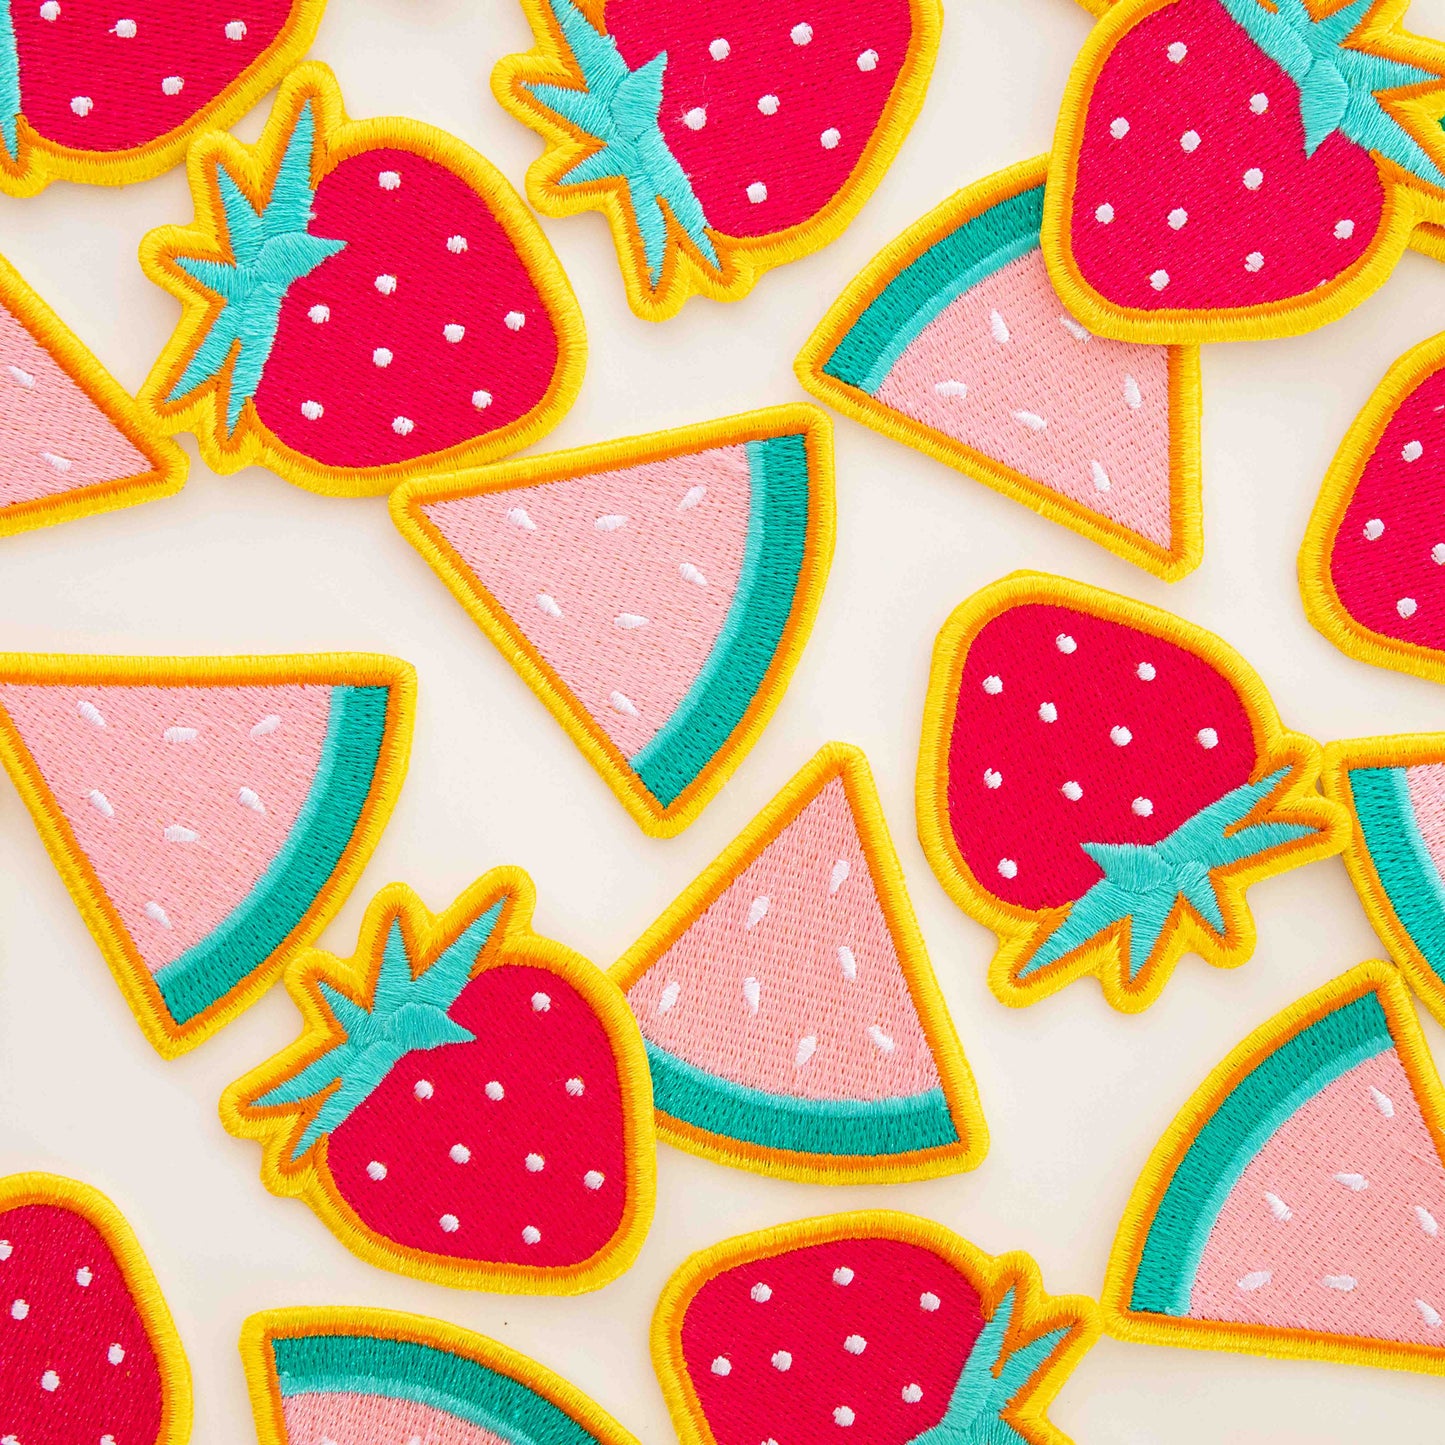 Watermelon and Strawberry Embroidered Patches - 2 Pack